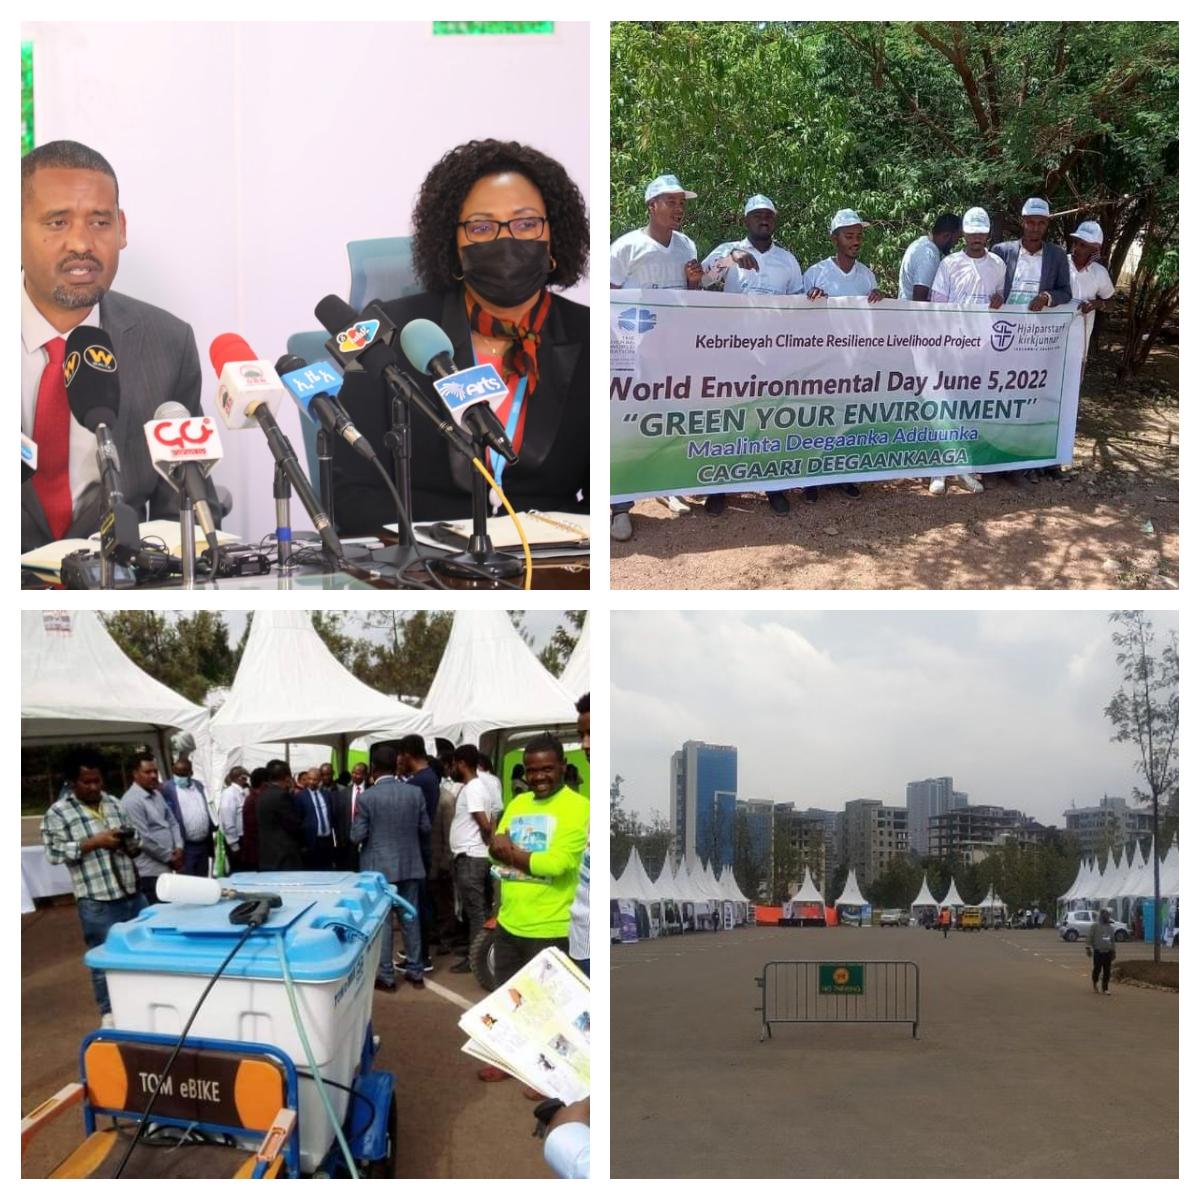 Weeklong activities in Ethiopia to celebrate World Environment Day 2022